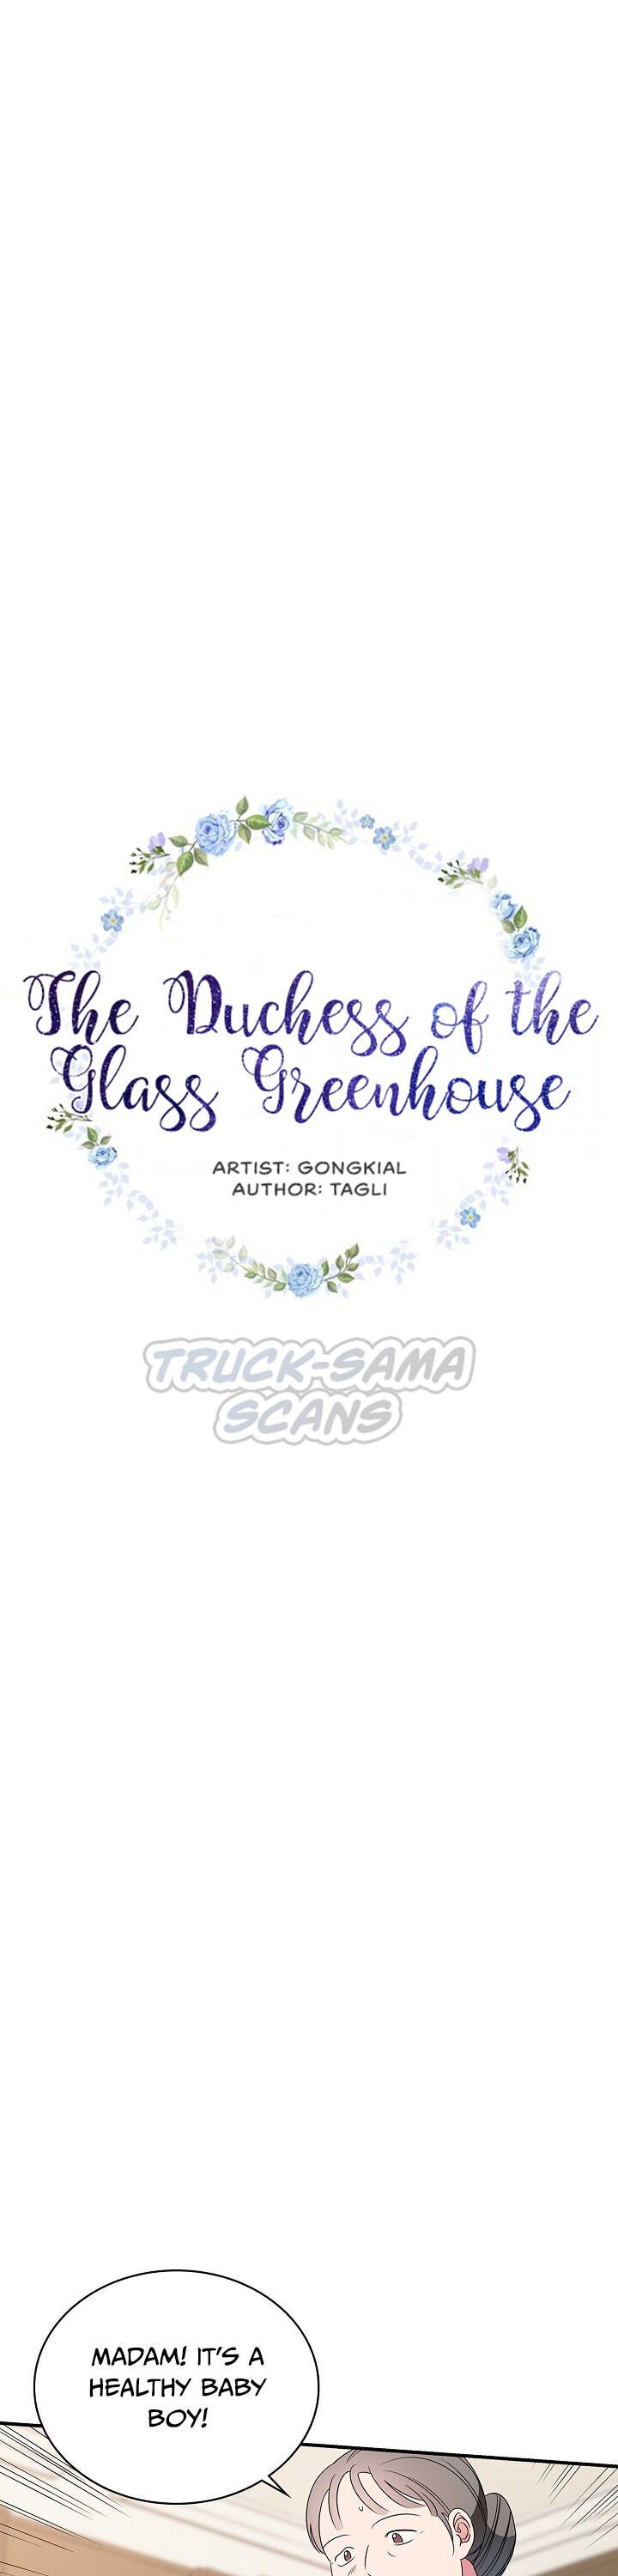 The Duchess of the Glass Greenhouse chapter 10